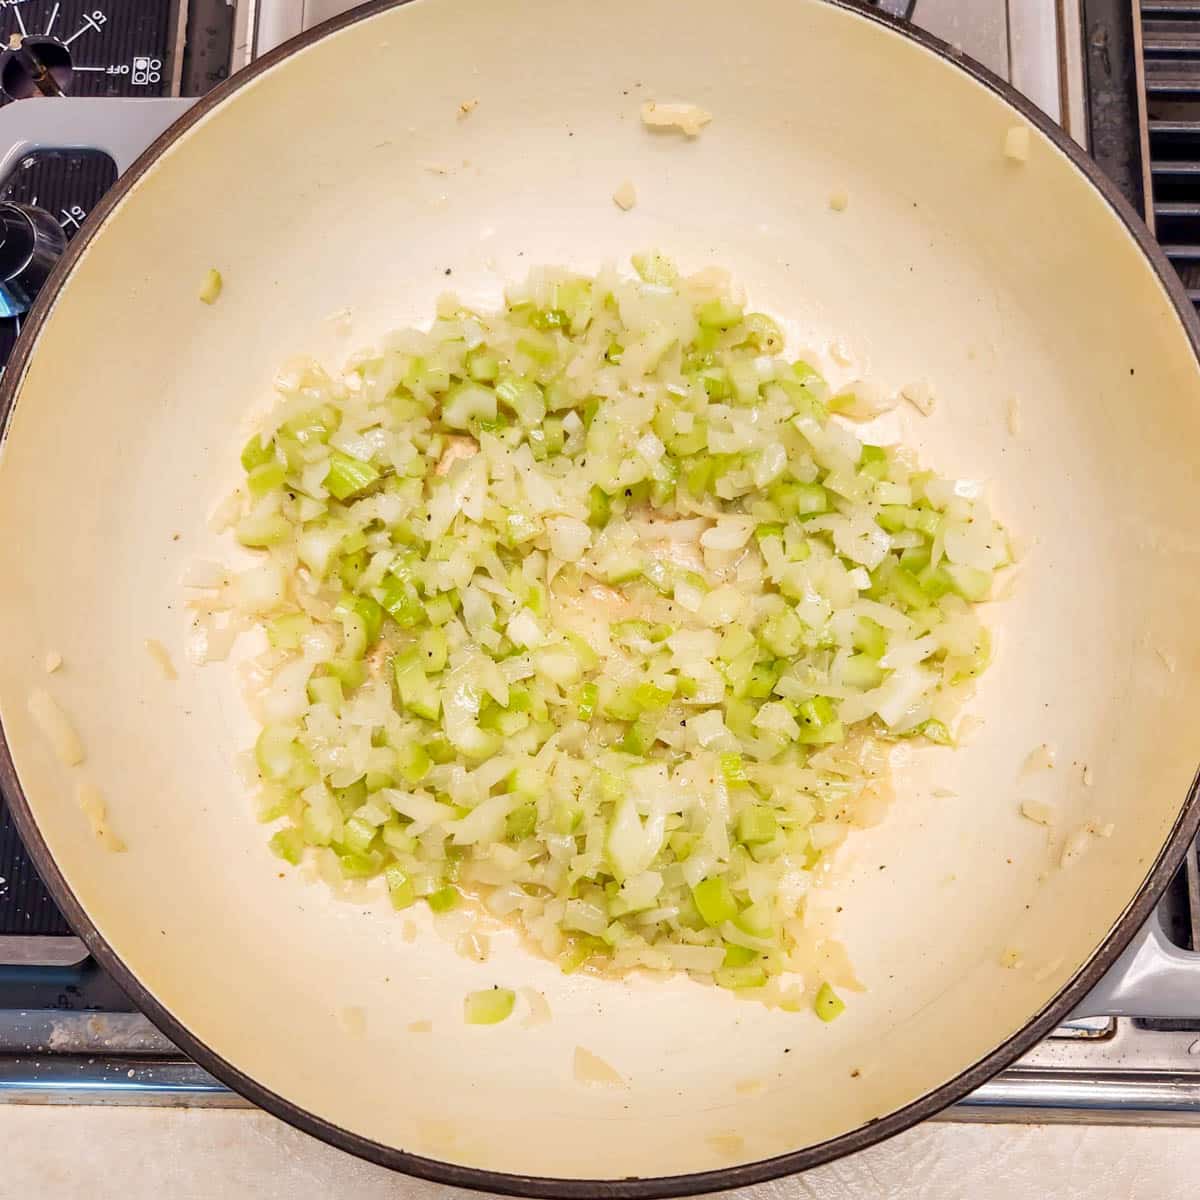 onions, celery and garlic sautéing in butter